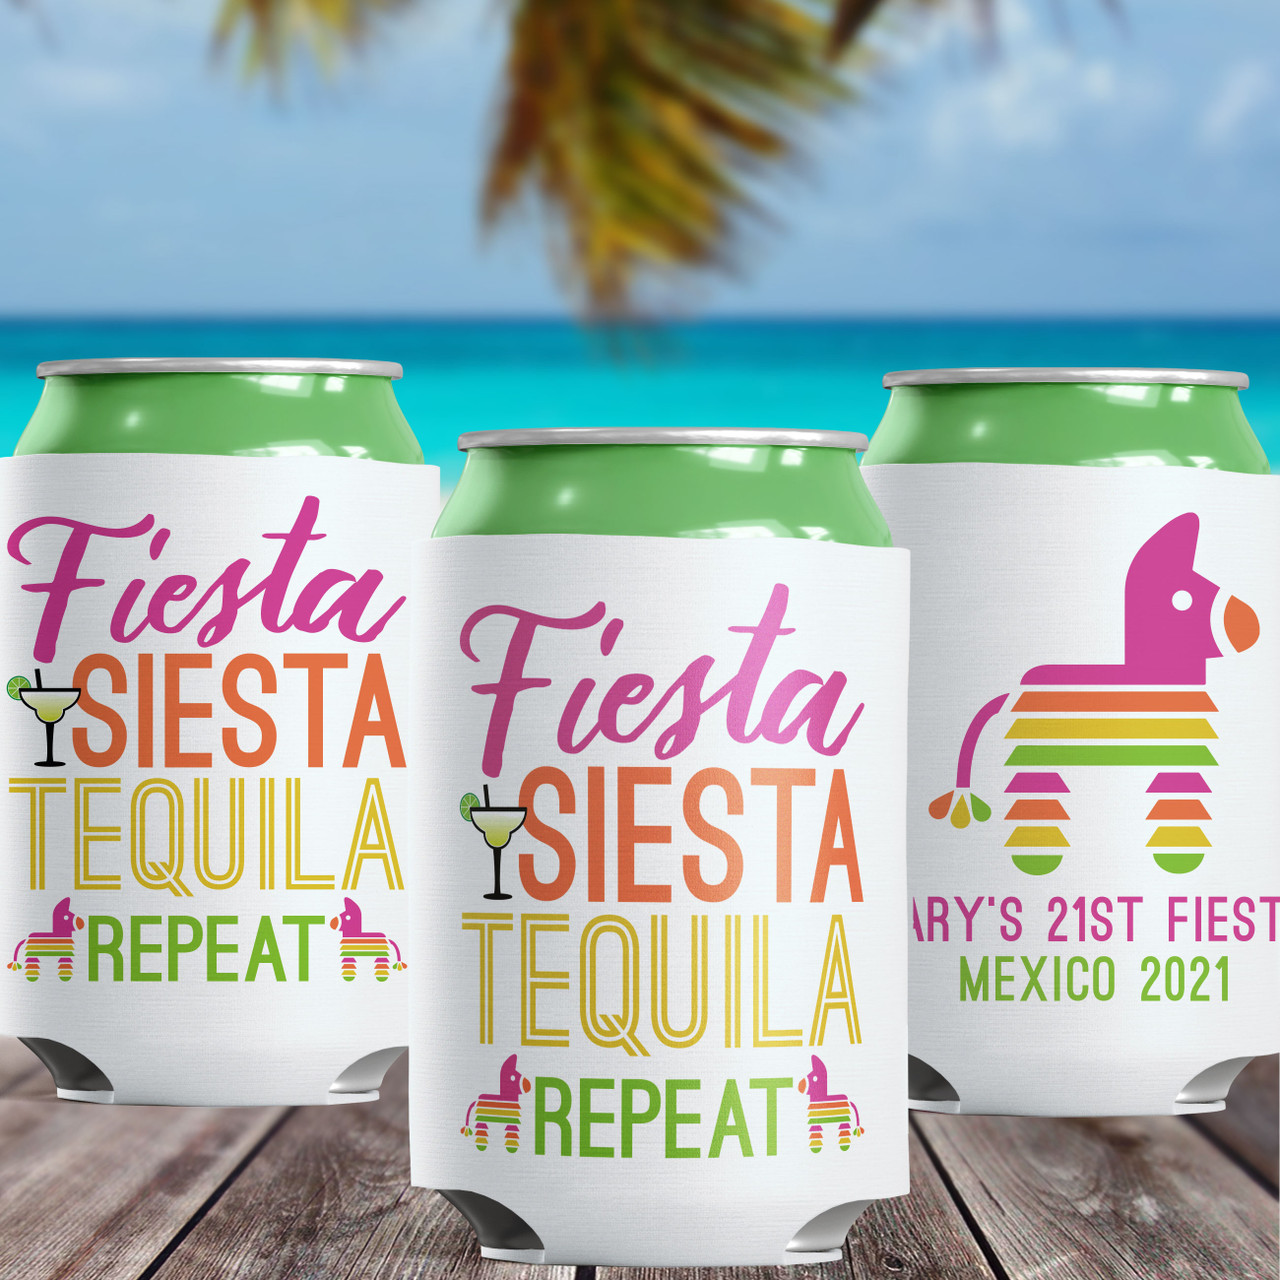 https://cdn11.bigcommerce.com/s-5grzuu6/images/stencil/1280x1280/products/4106/38985/Fiesta-Siesta_Tequila_Personalized_Can_Coolers__94683.1632168217.jpg?c=2